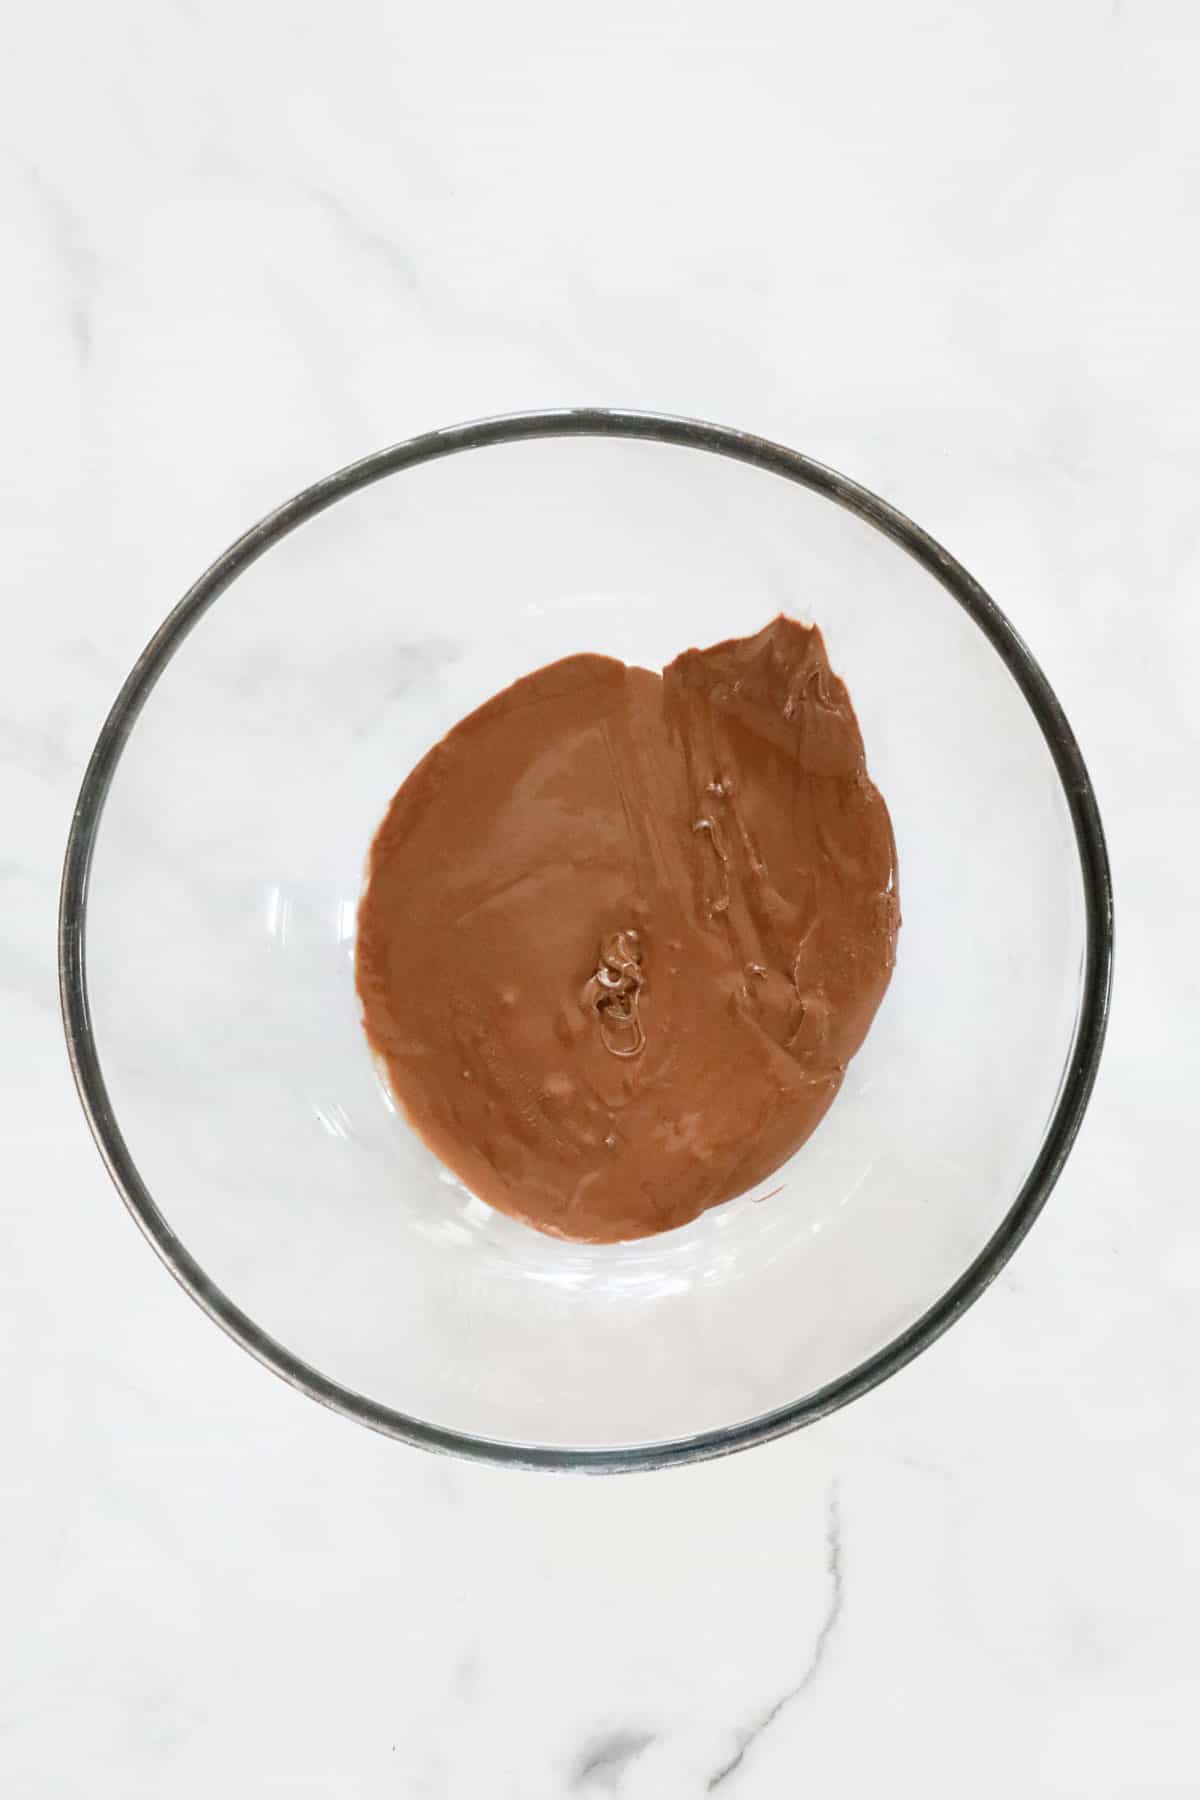 Hazelnut spread in a heatproof bowl after being in the microwave.